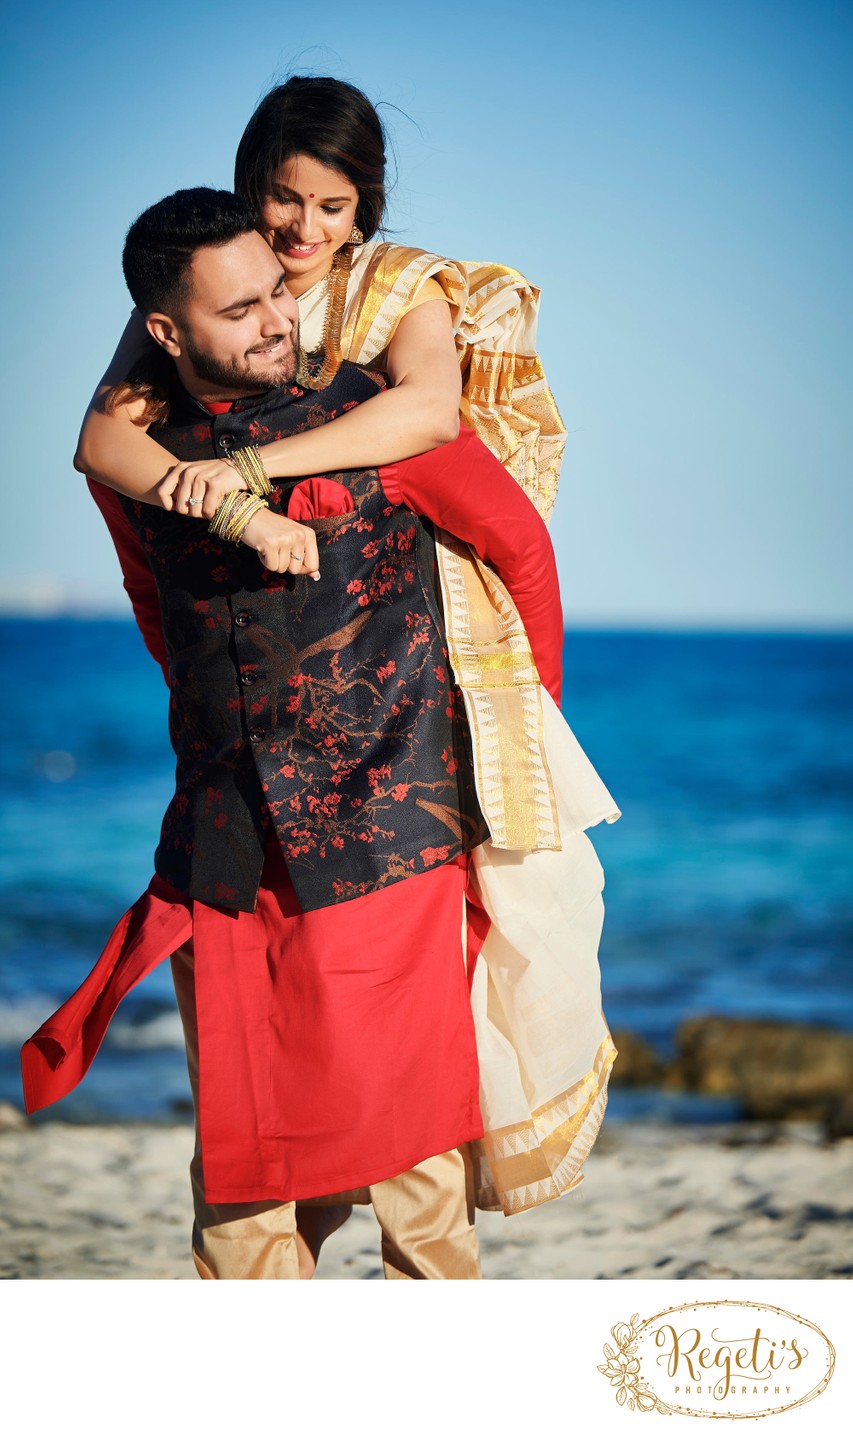 Anuj and Shruthi’s Pre-Wedding Beach Photoshoot at the Lighthouse